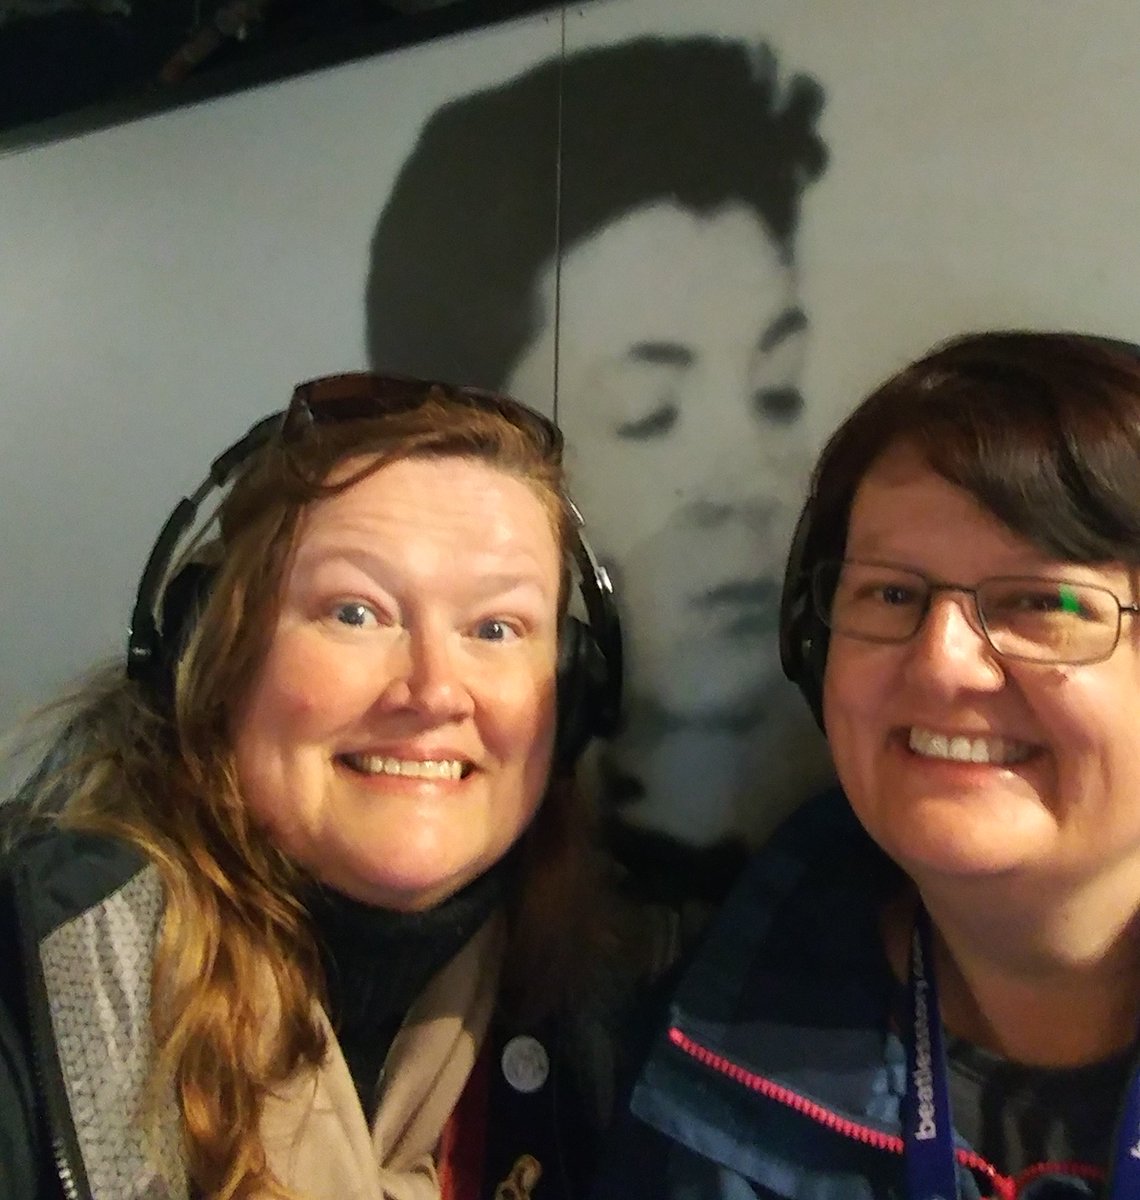 Ahah Teatle spotting at @beatlesstory in #Liverpool with @Vicky_thelabrat ! Wish you were here @cherryaimless @Teatlemania #TheBeatles @Bootlemania